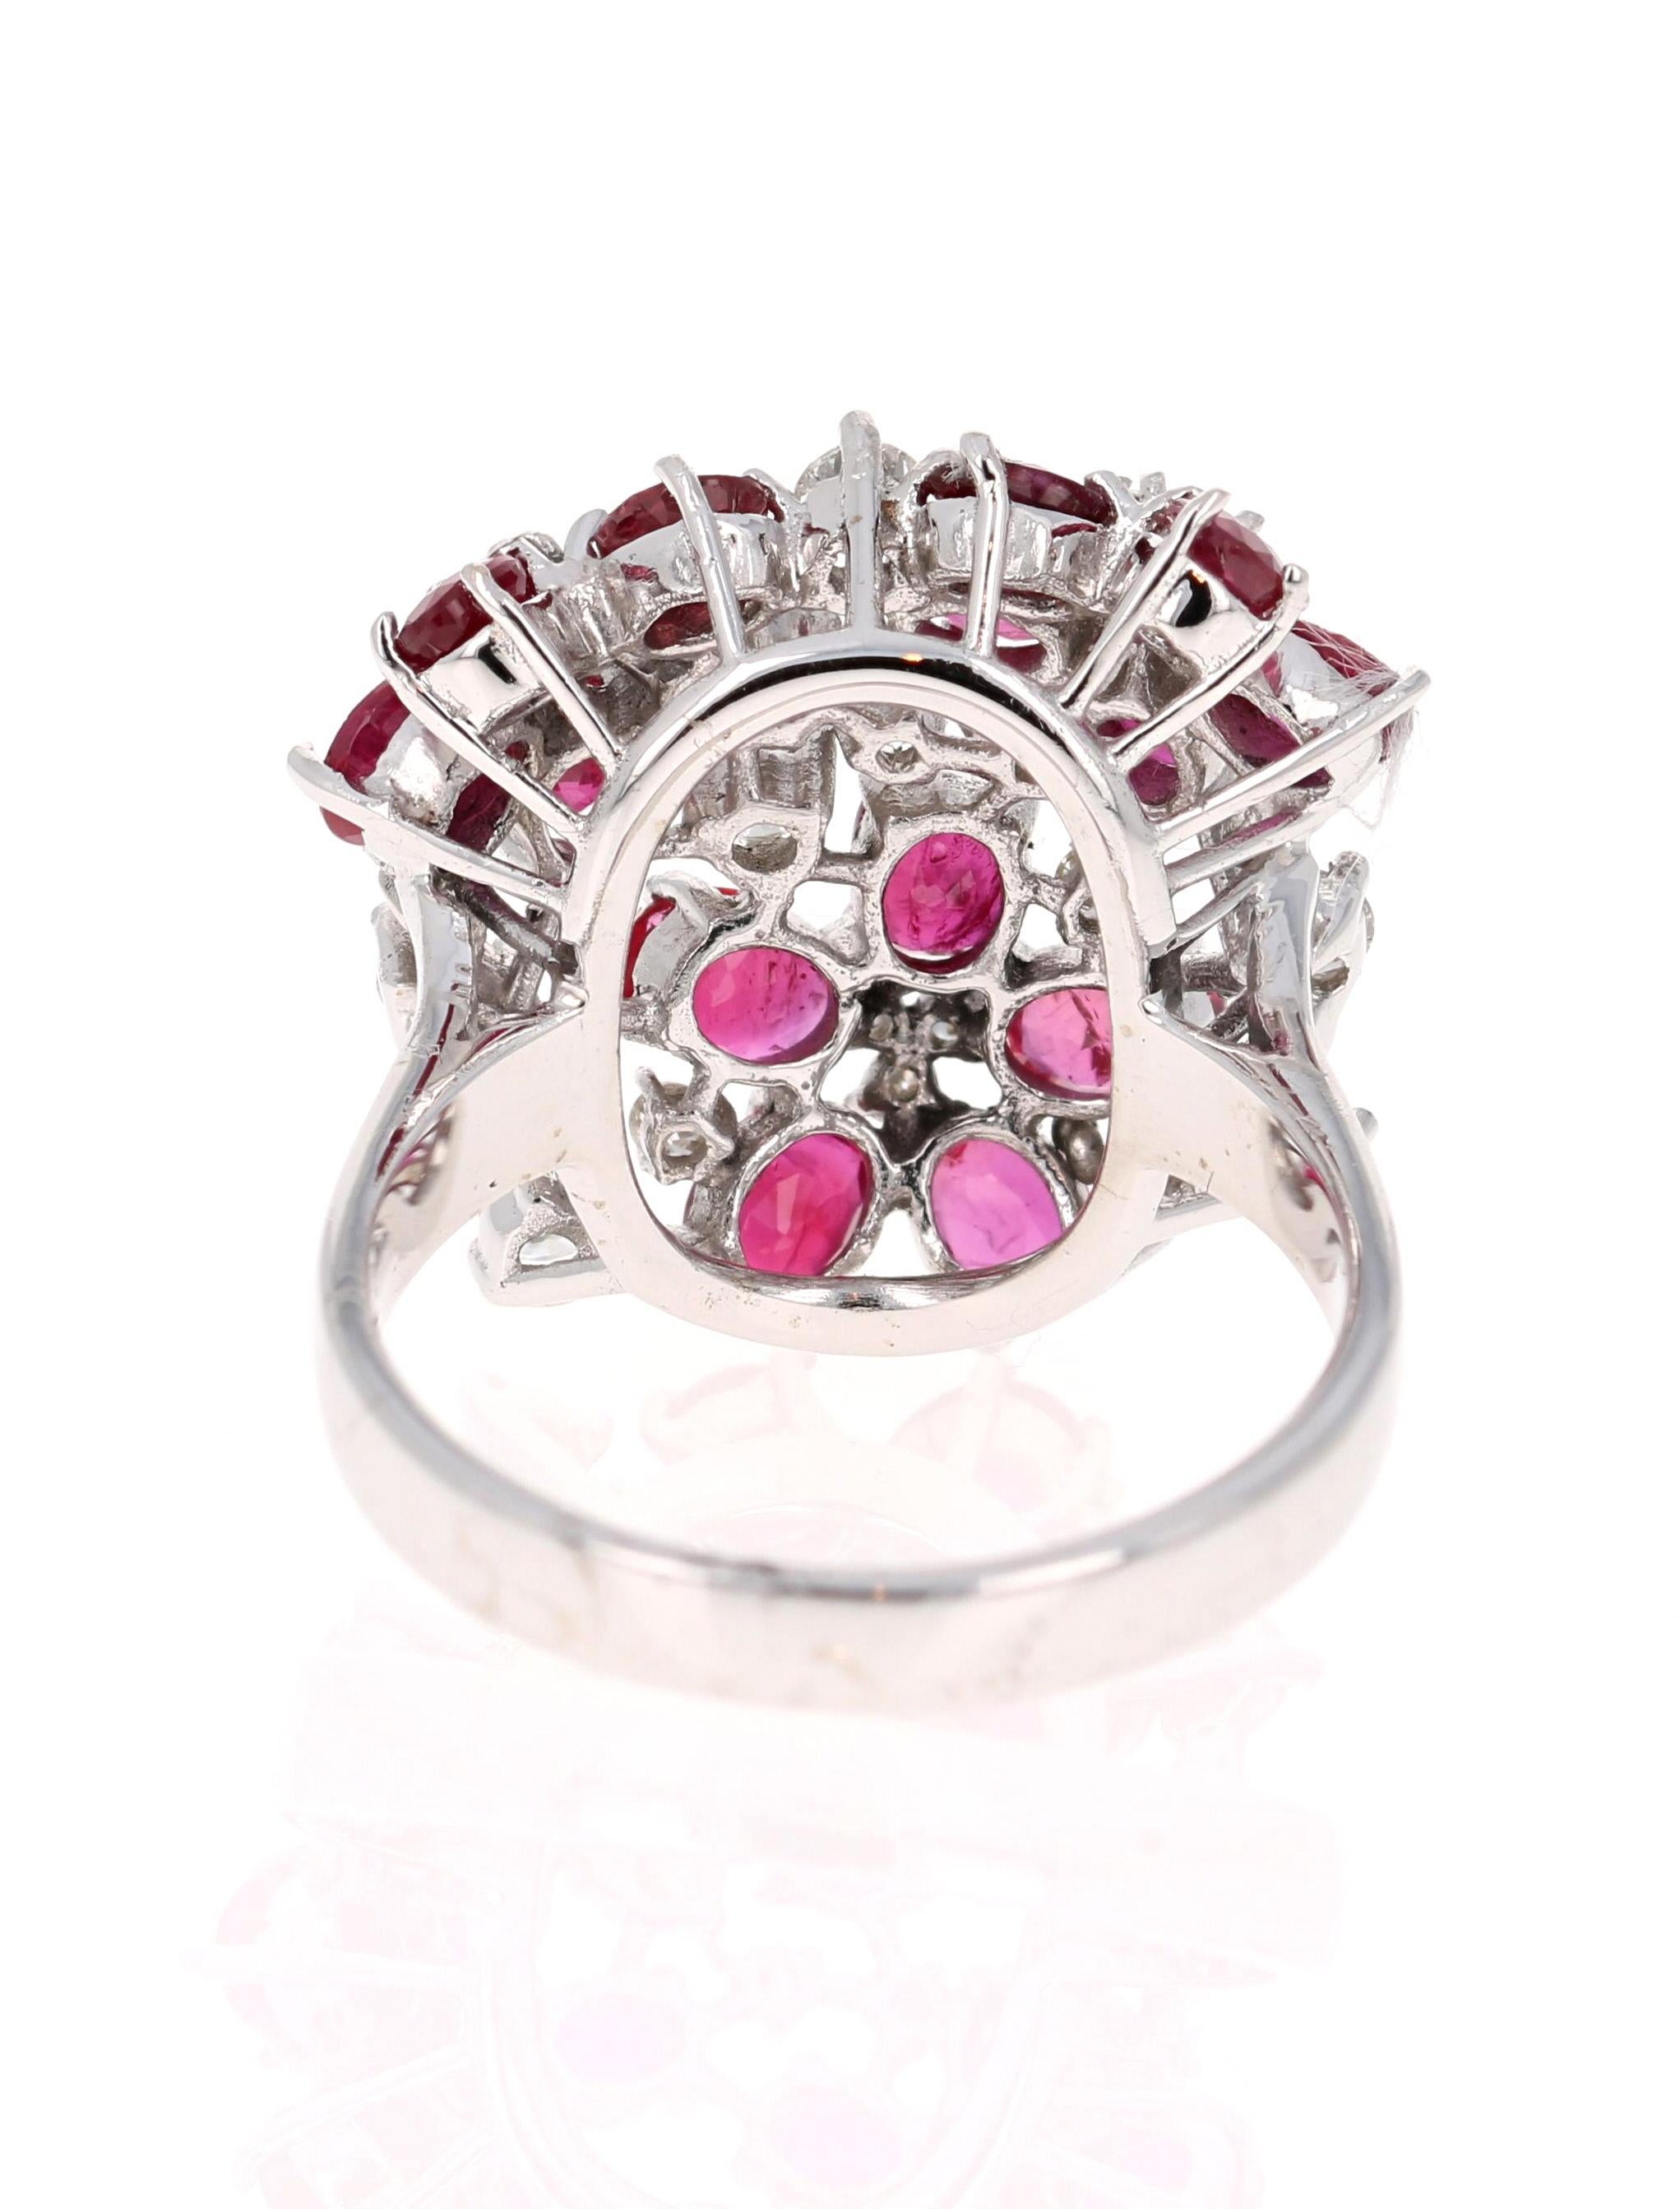 Oval Cut 3.36 Carat Ruby and Diamond 18 Karat White Gold Cocktail Ring